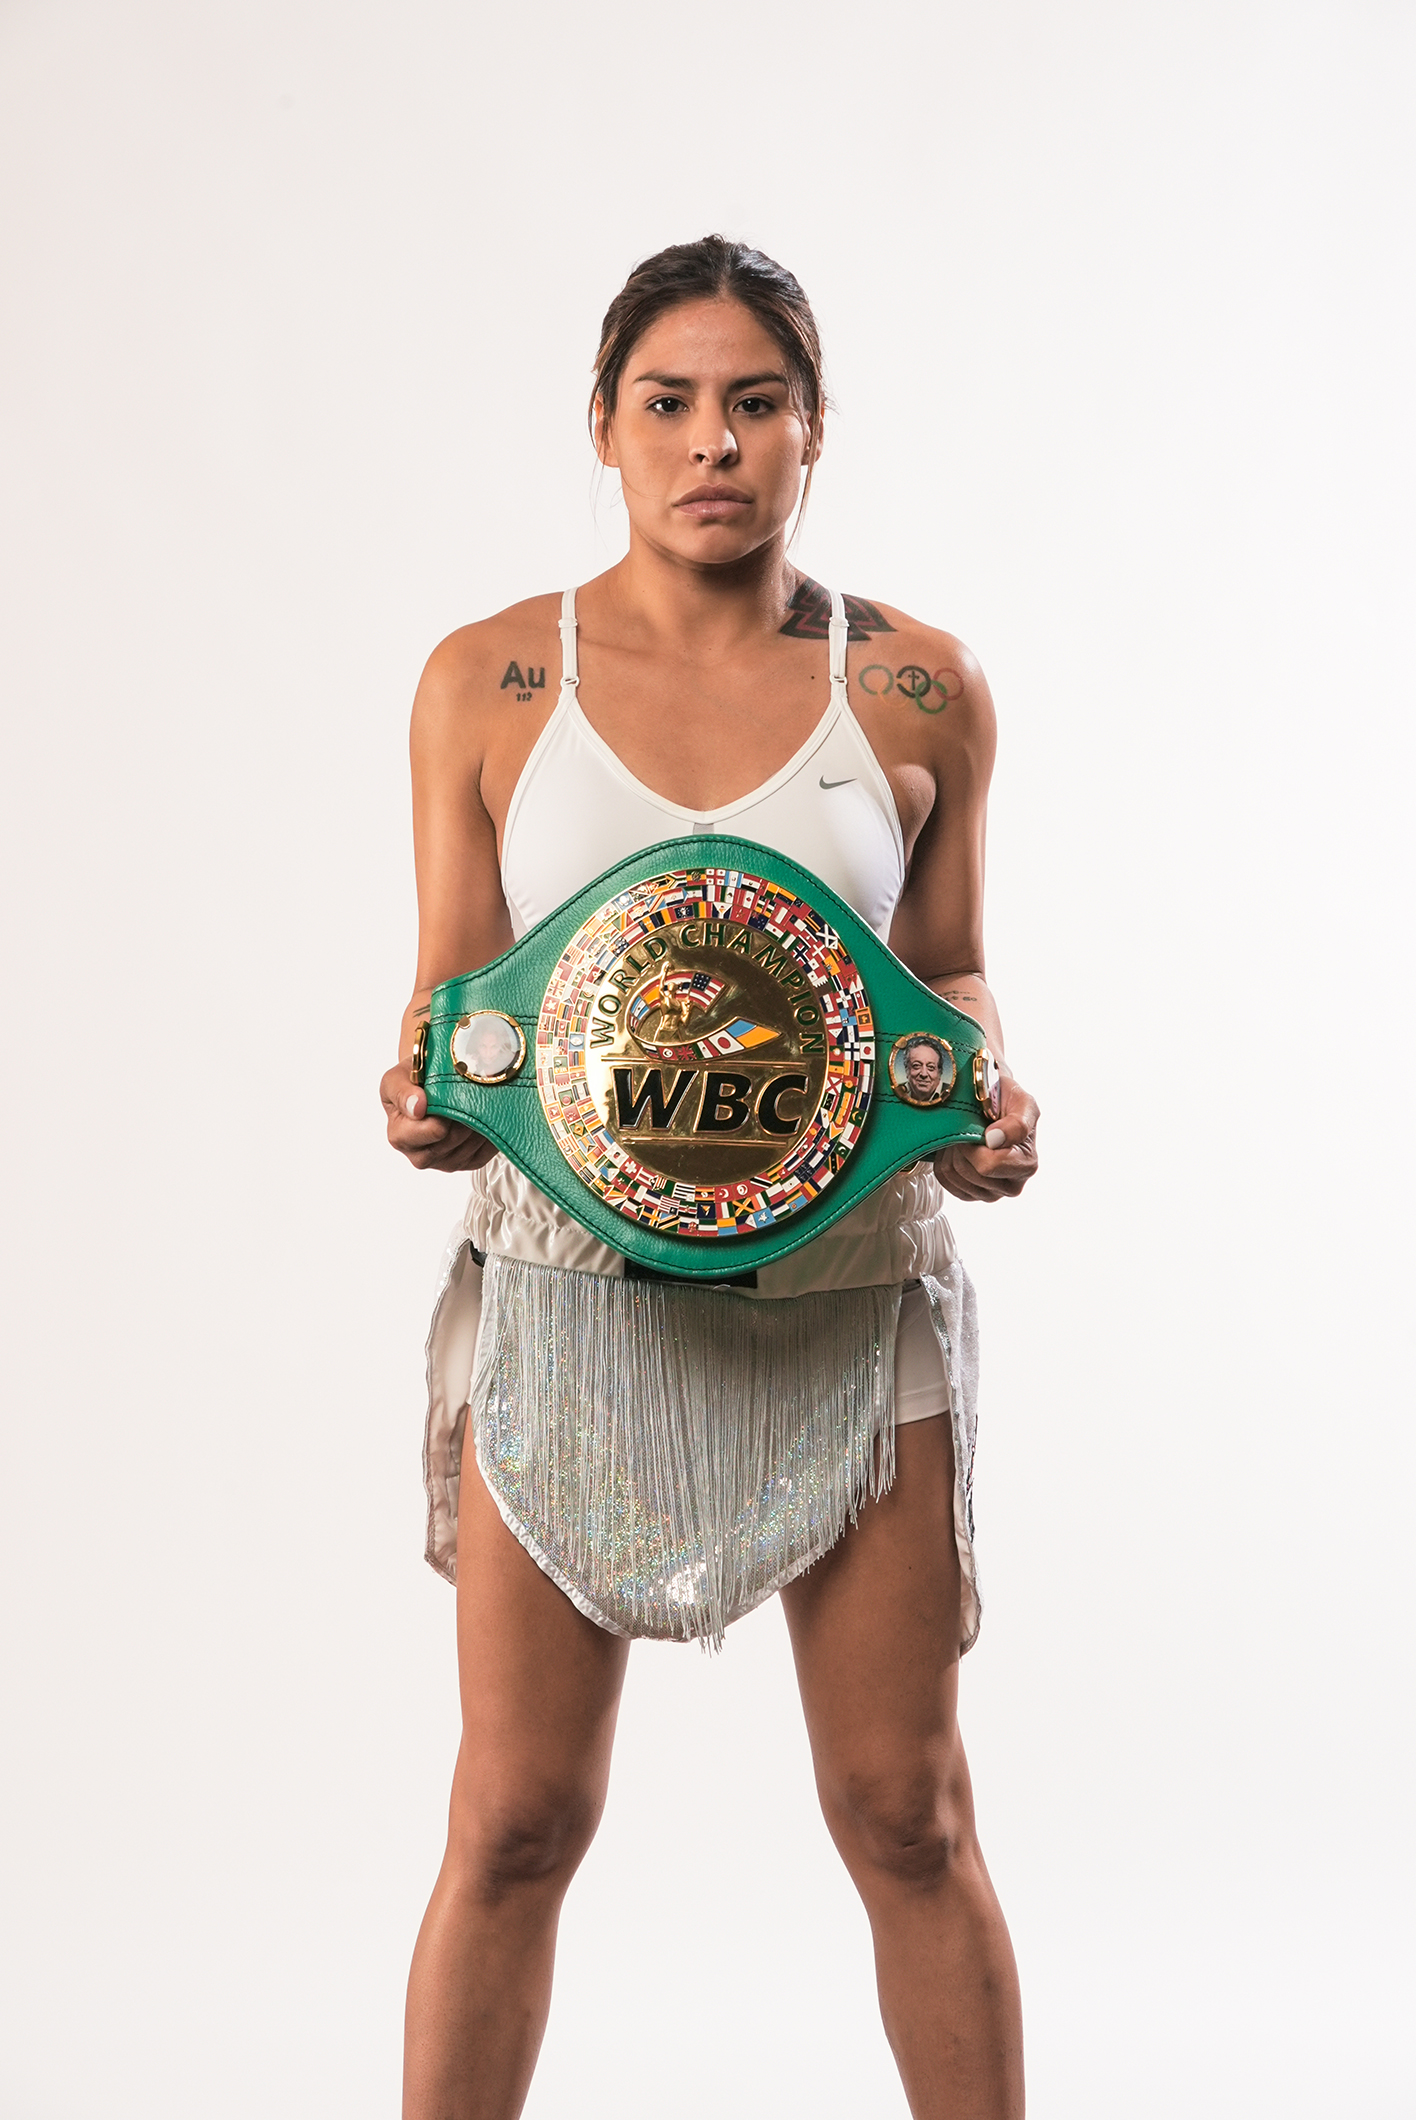 Marlen Esparza Looks to Unify Three Flyweight Titles In Upcoming Bout